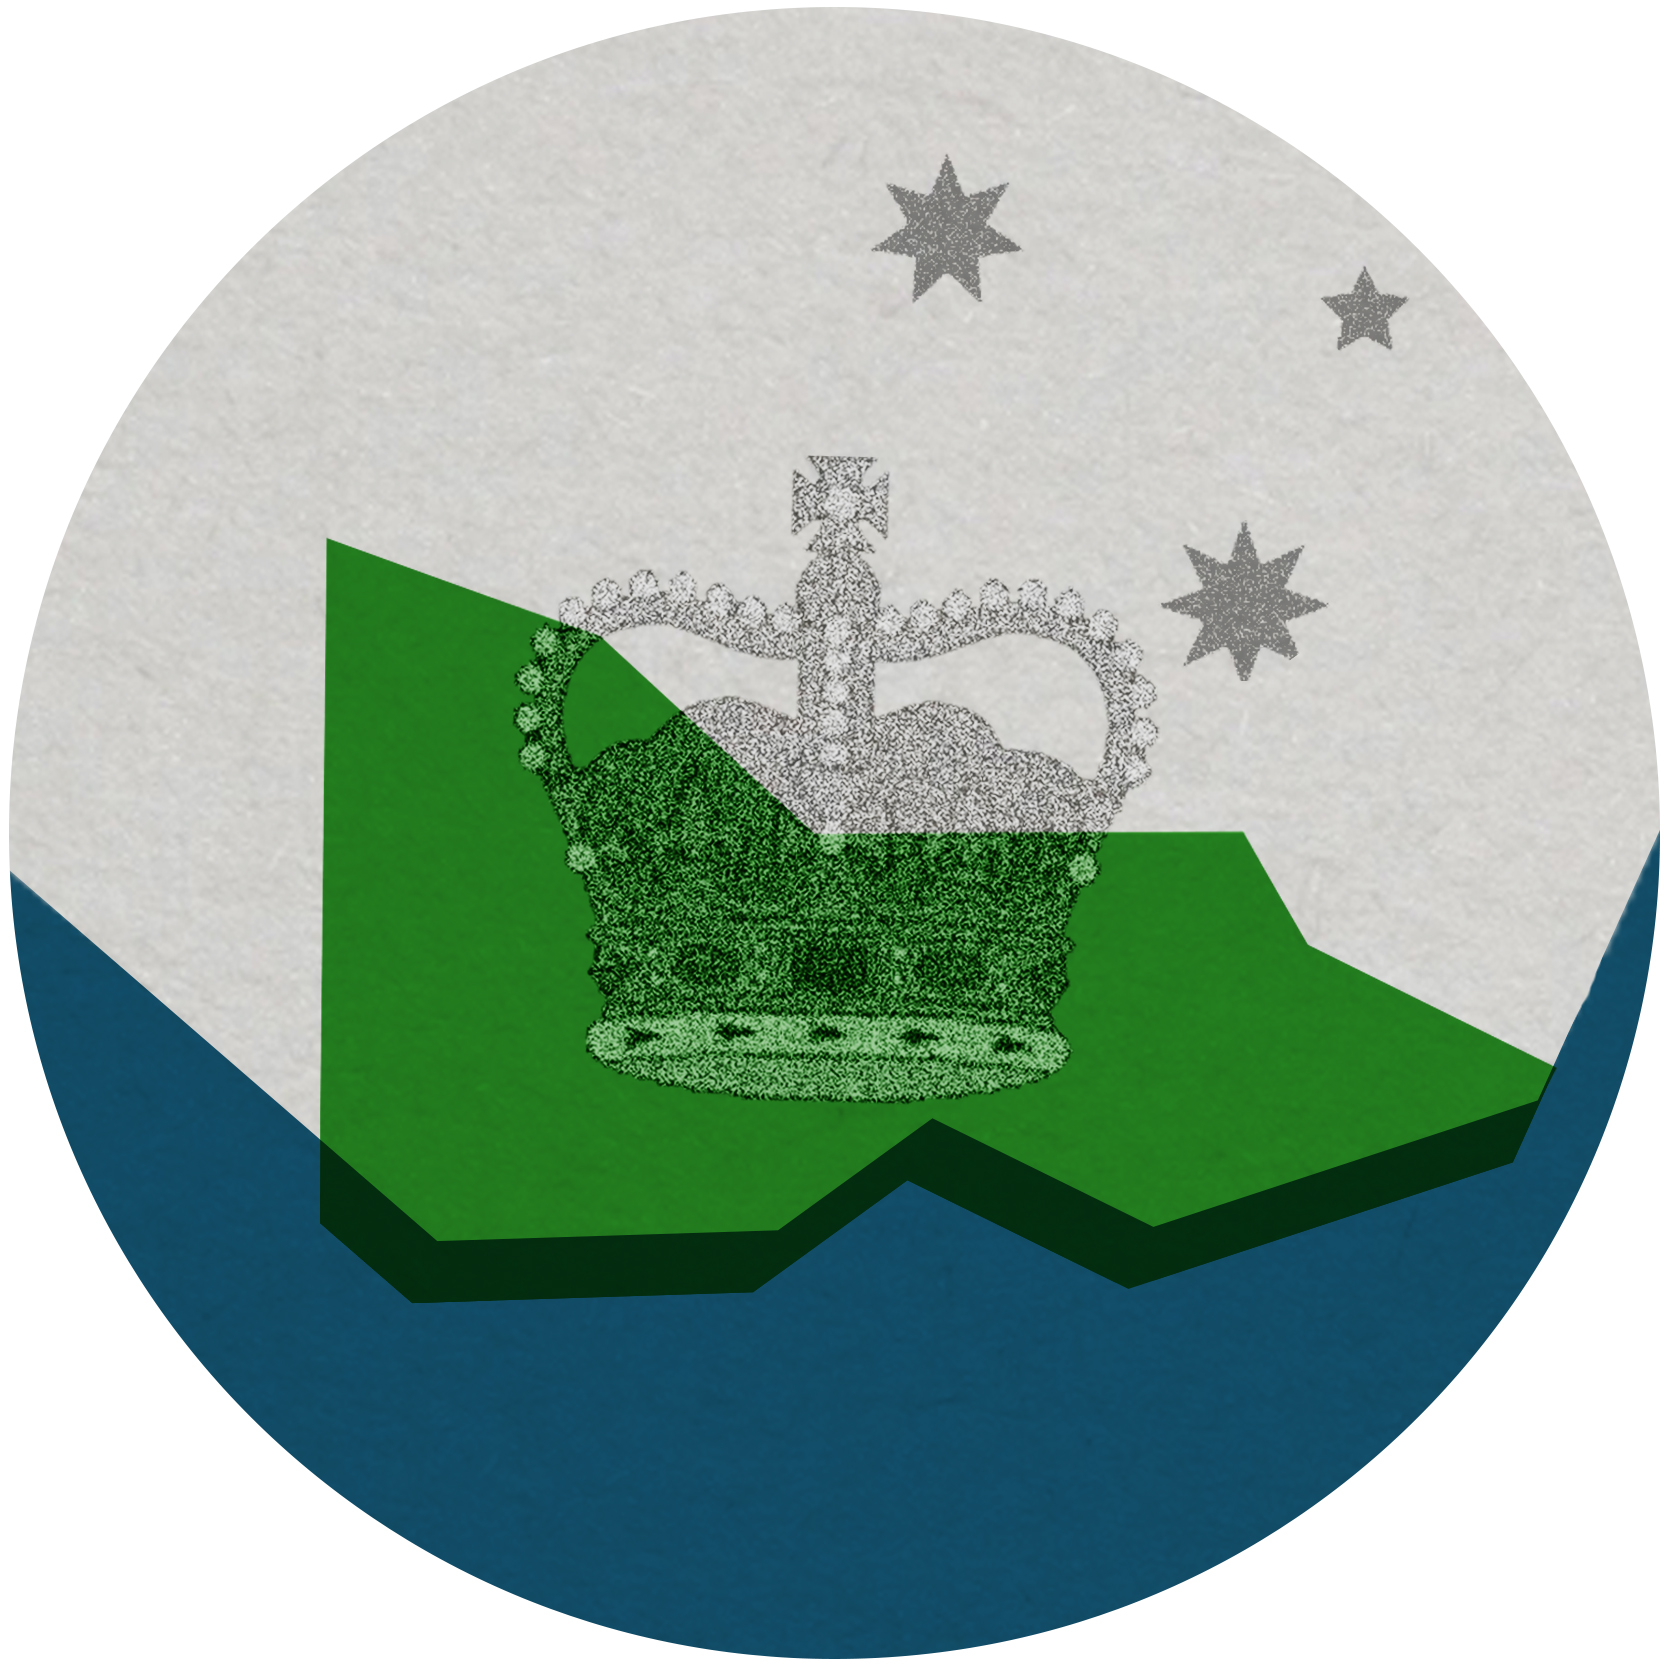 an outline of the state of Victoria in green, the crown from the state flag and stars are outlined in grey